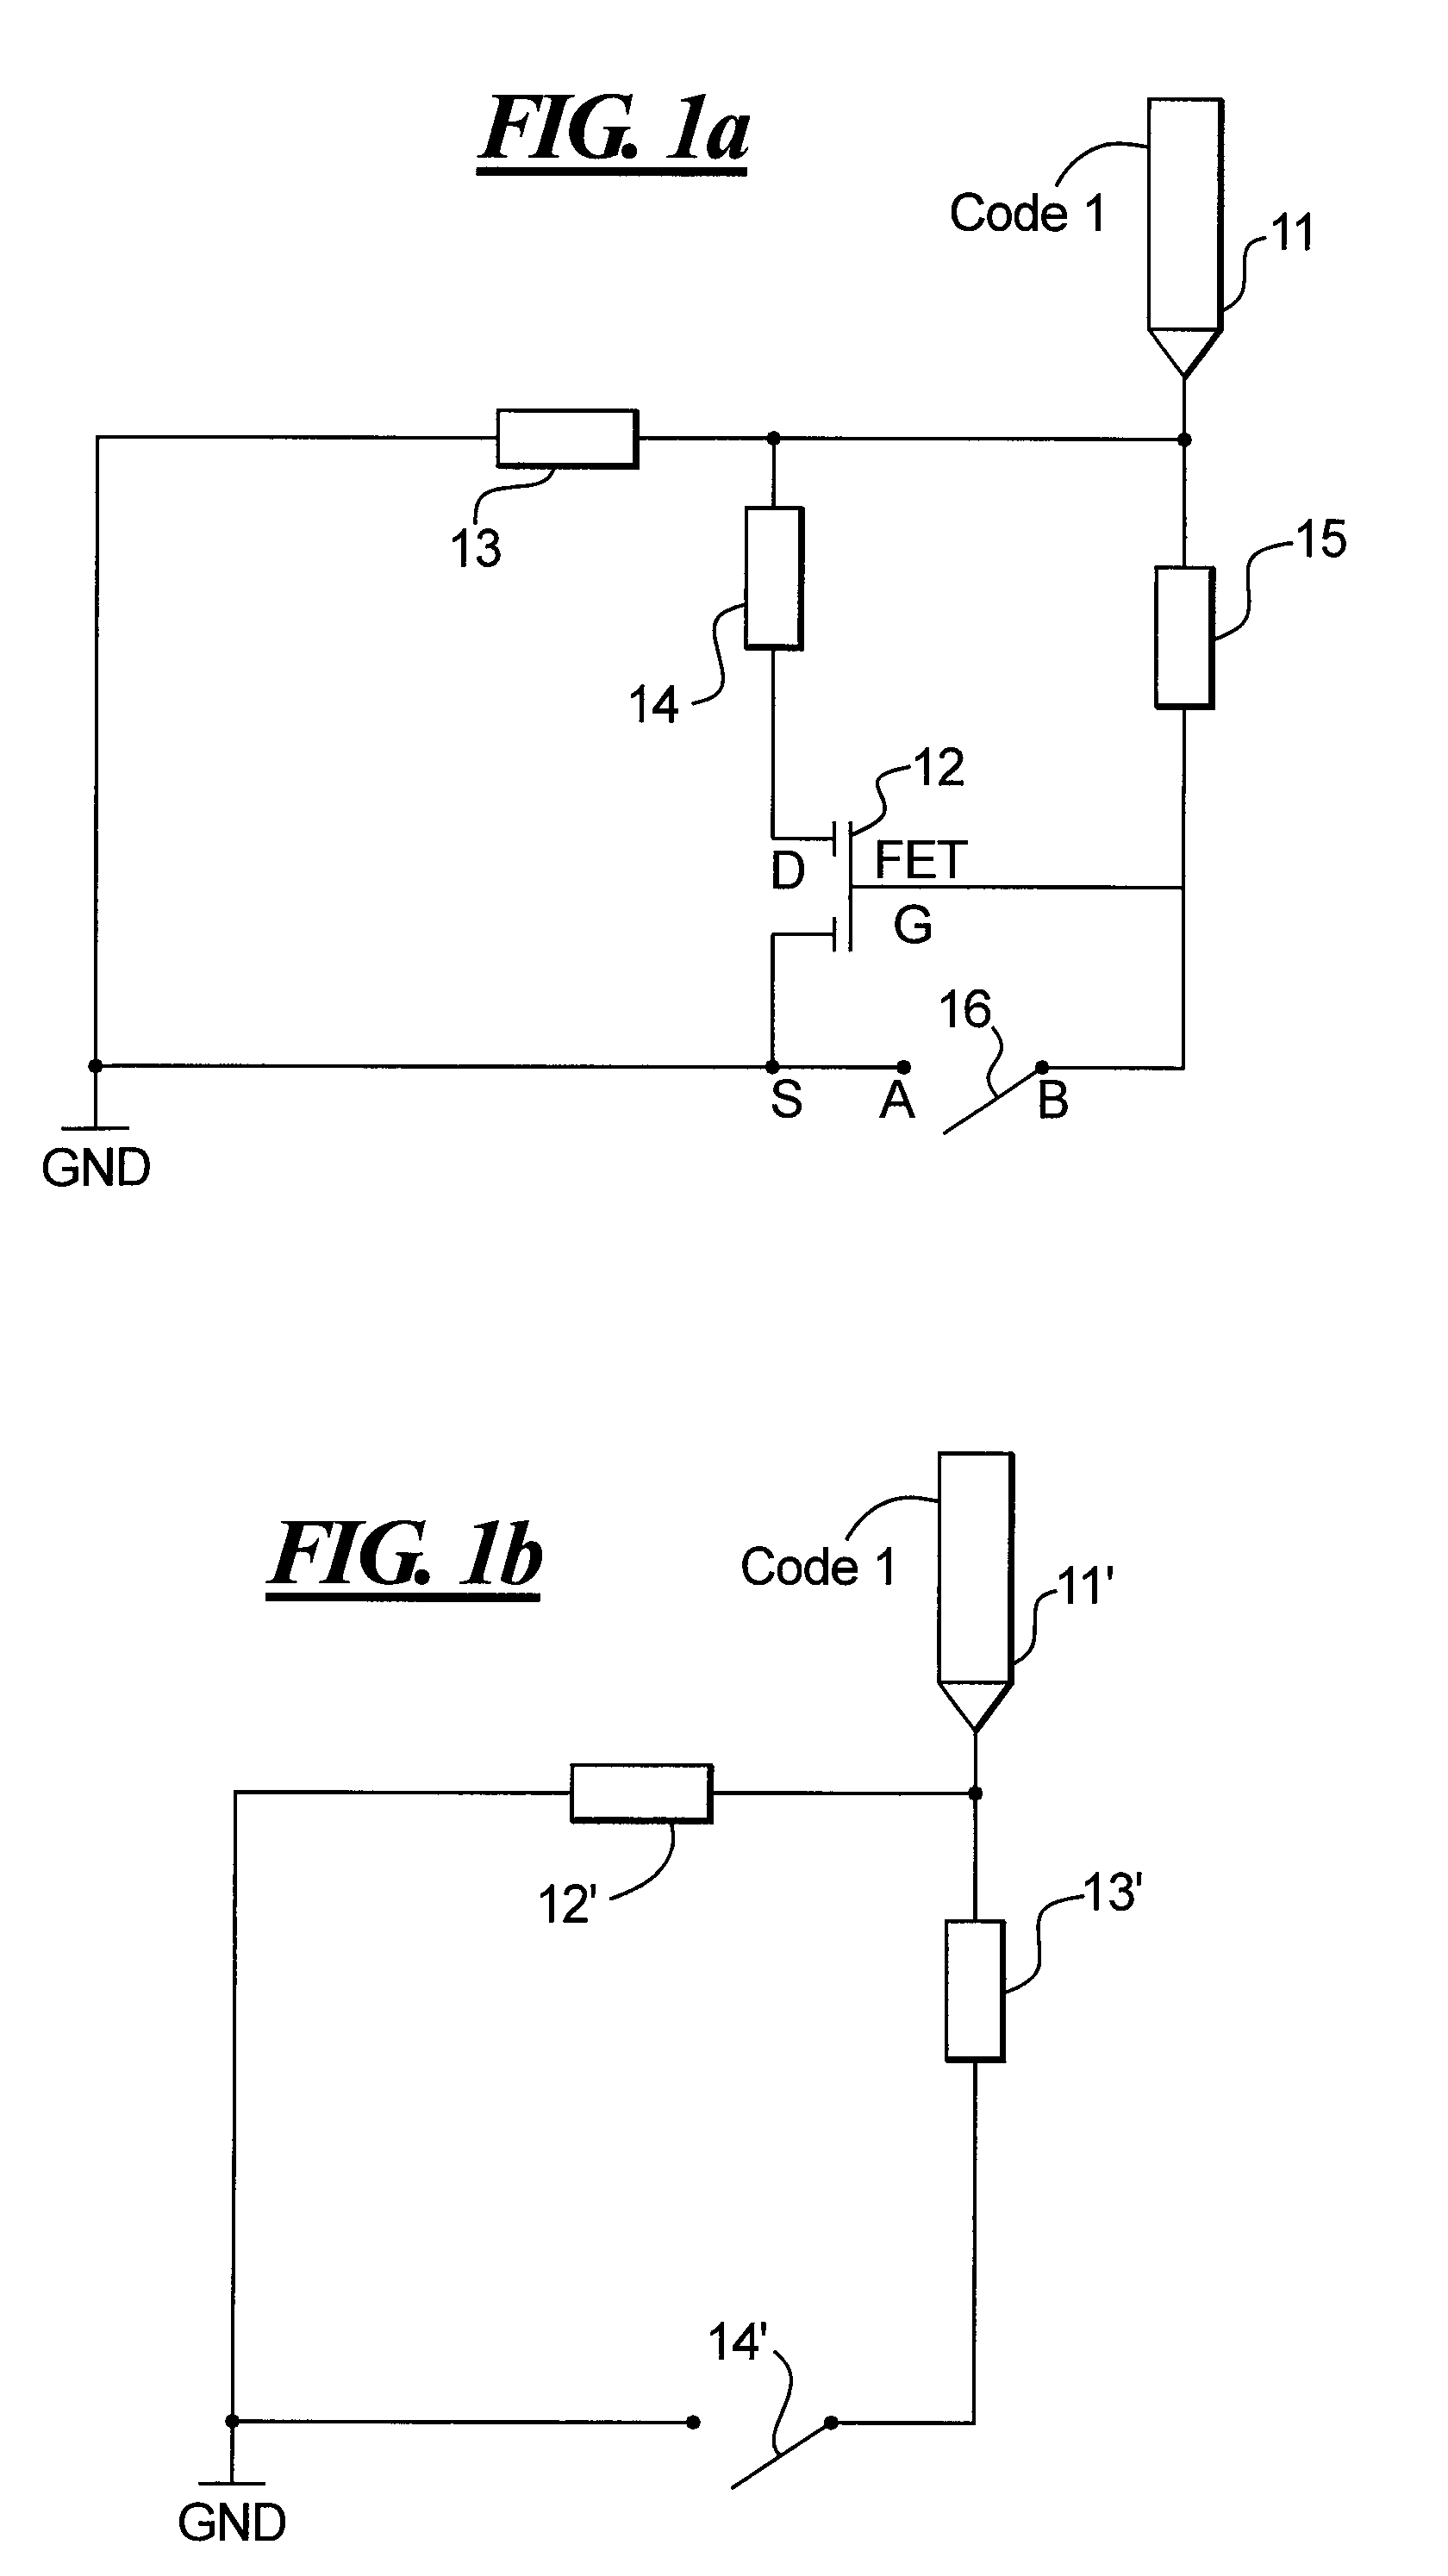 Identification code circuit for receiving coil in magnetic resonance imaging system